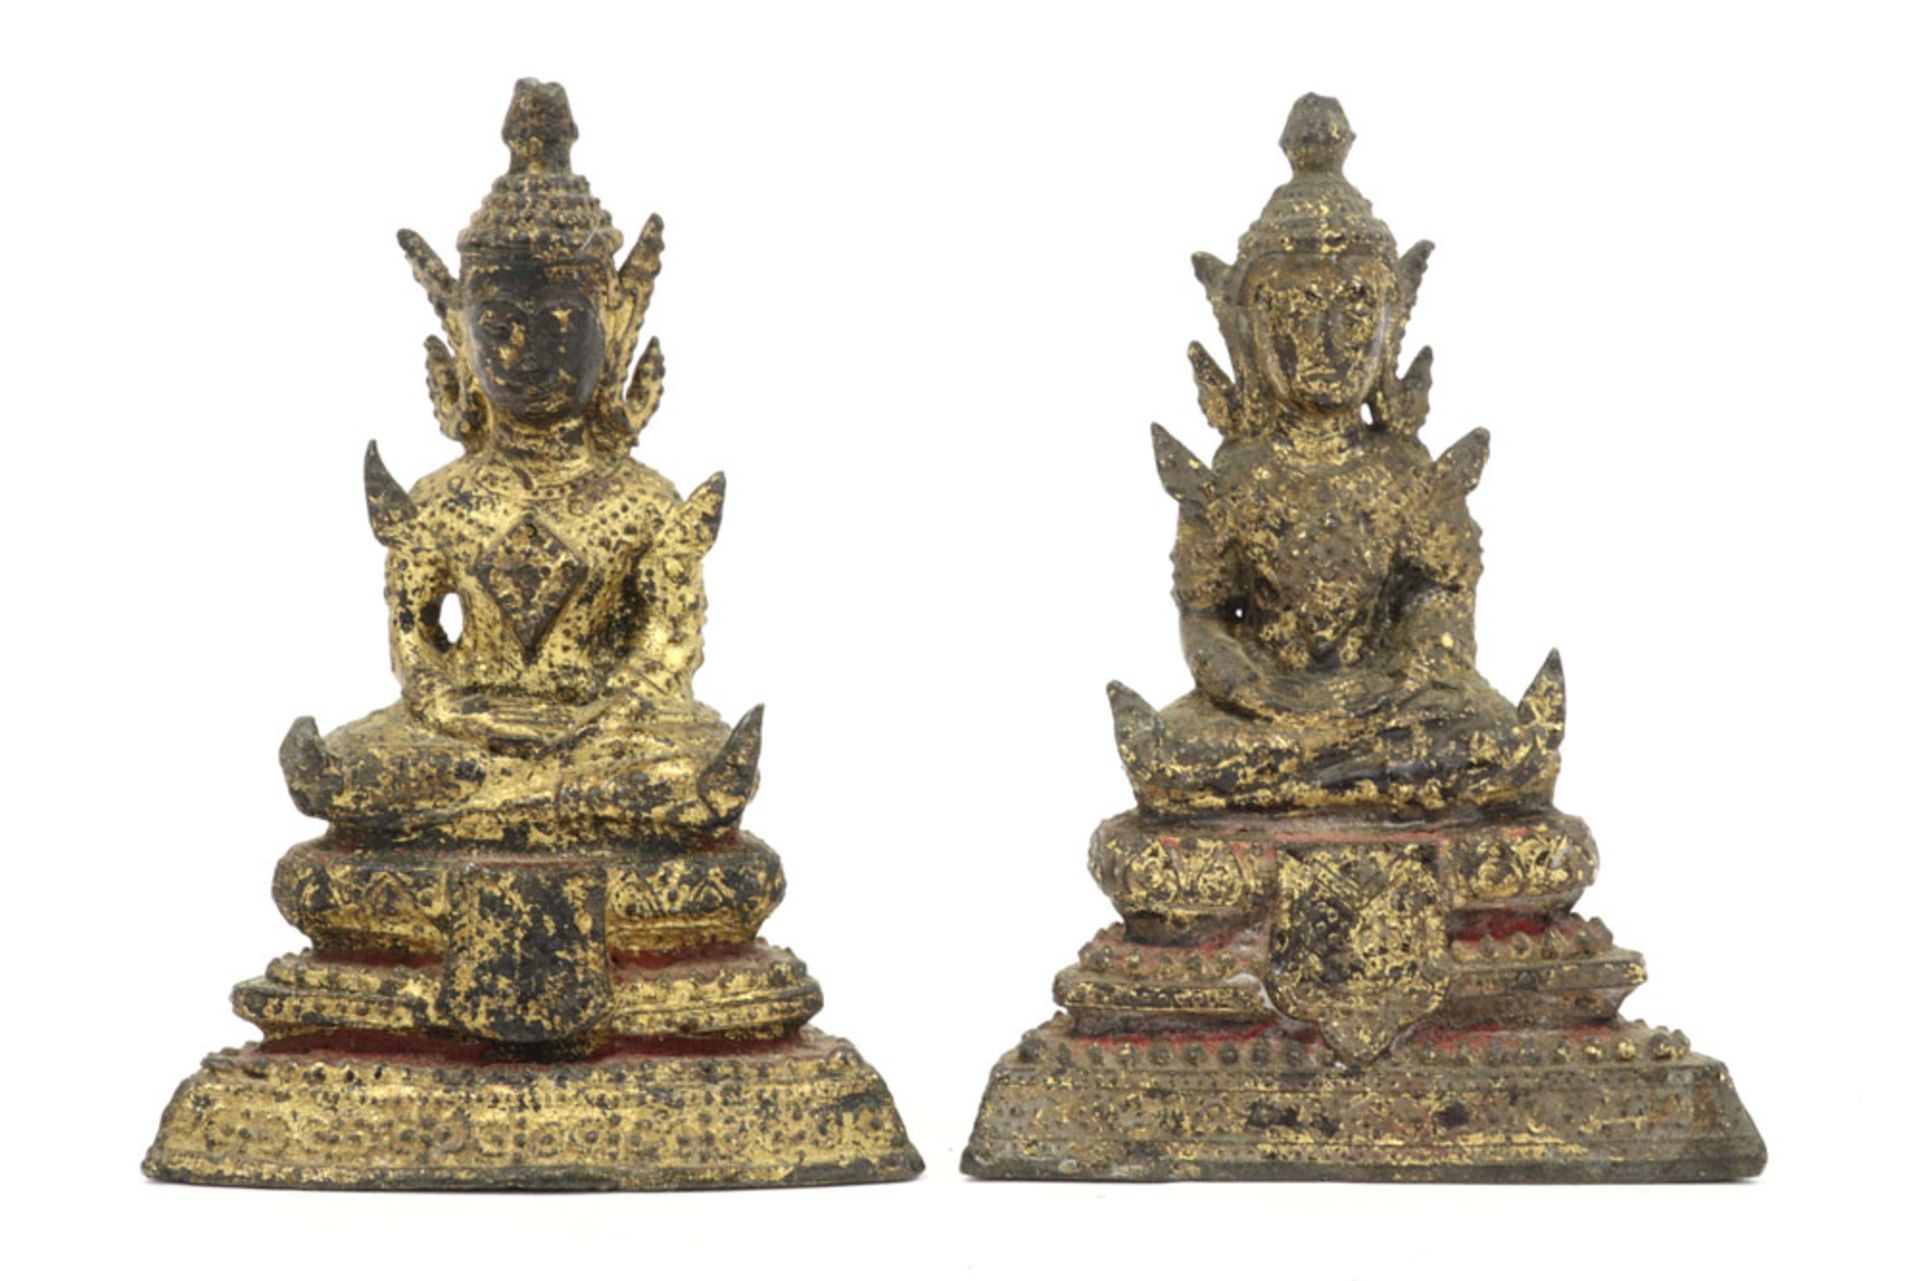 two antique Siamese Rattanakossinperiod "Buddha" sculptures in bronze with remains of the original